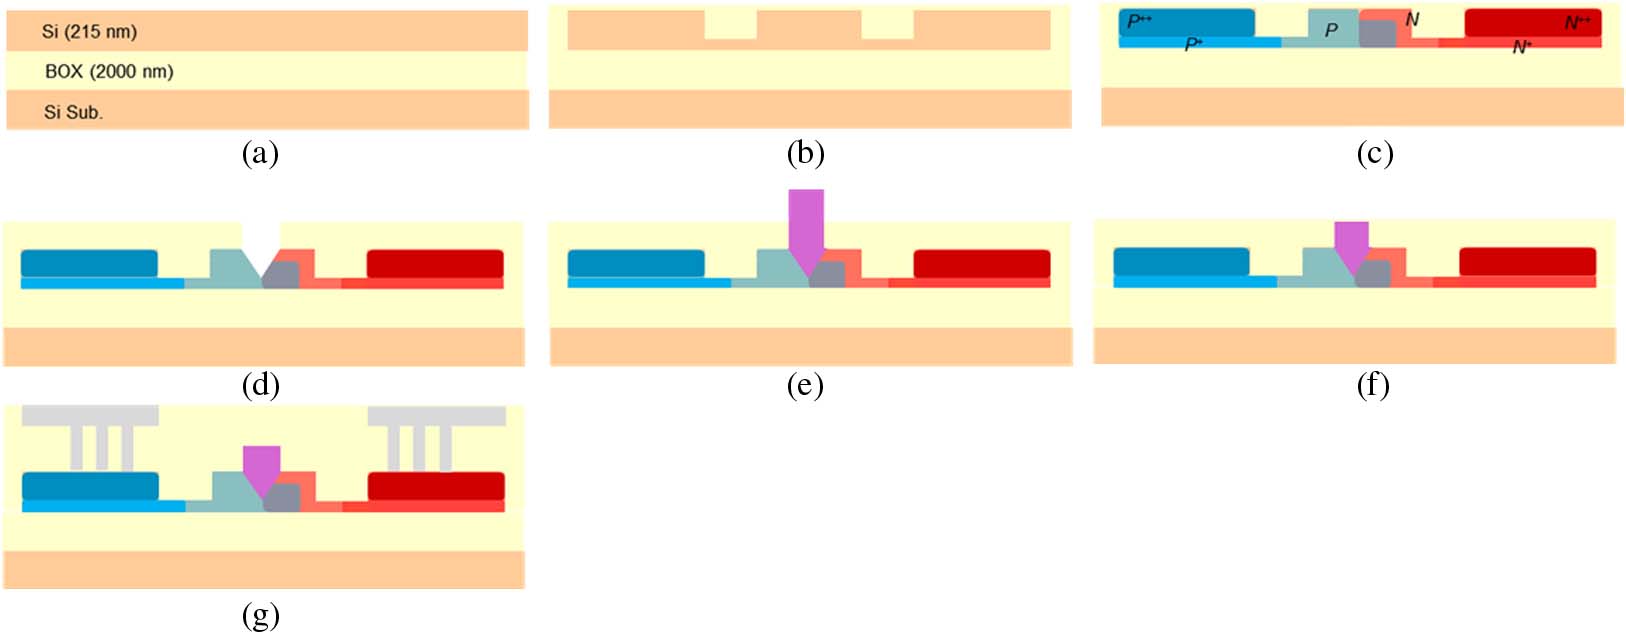 Integration flow of the GaAs/Si optical phase shifter. (a) Si-on-insulator, (b) waveguide formation, (c) L-shape pn junction formation, (d) Si V-groove formation, (e) epitaxial GaAs growth on Si V-groove, (f) planarization, and (g) SiO2 passivation and electrode formation.